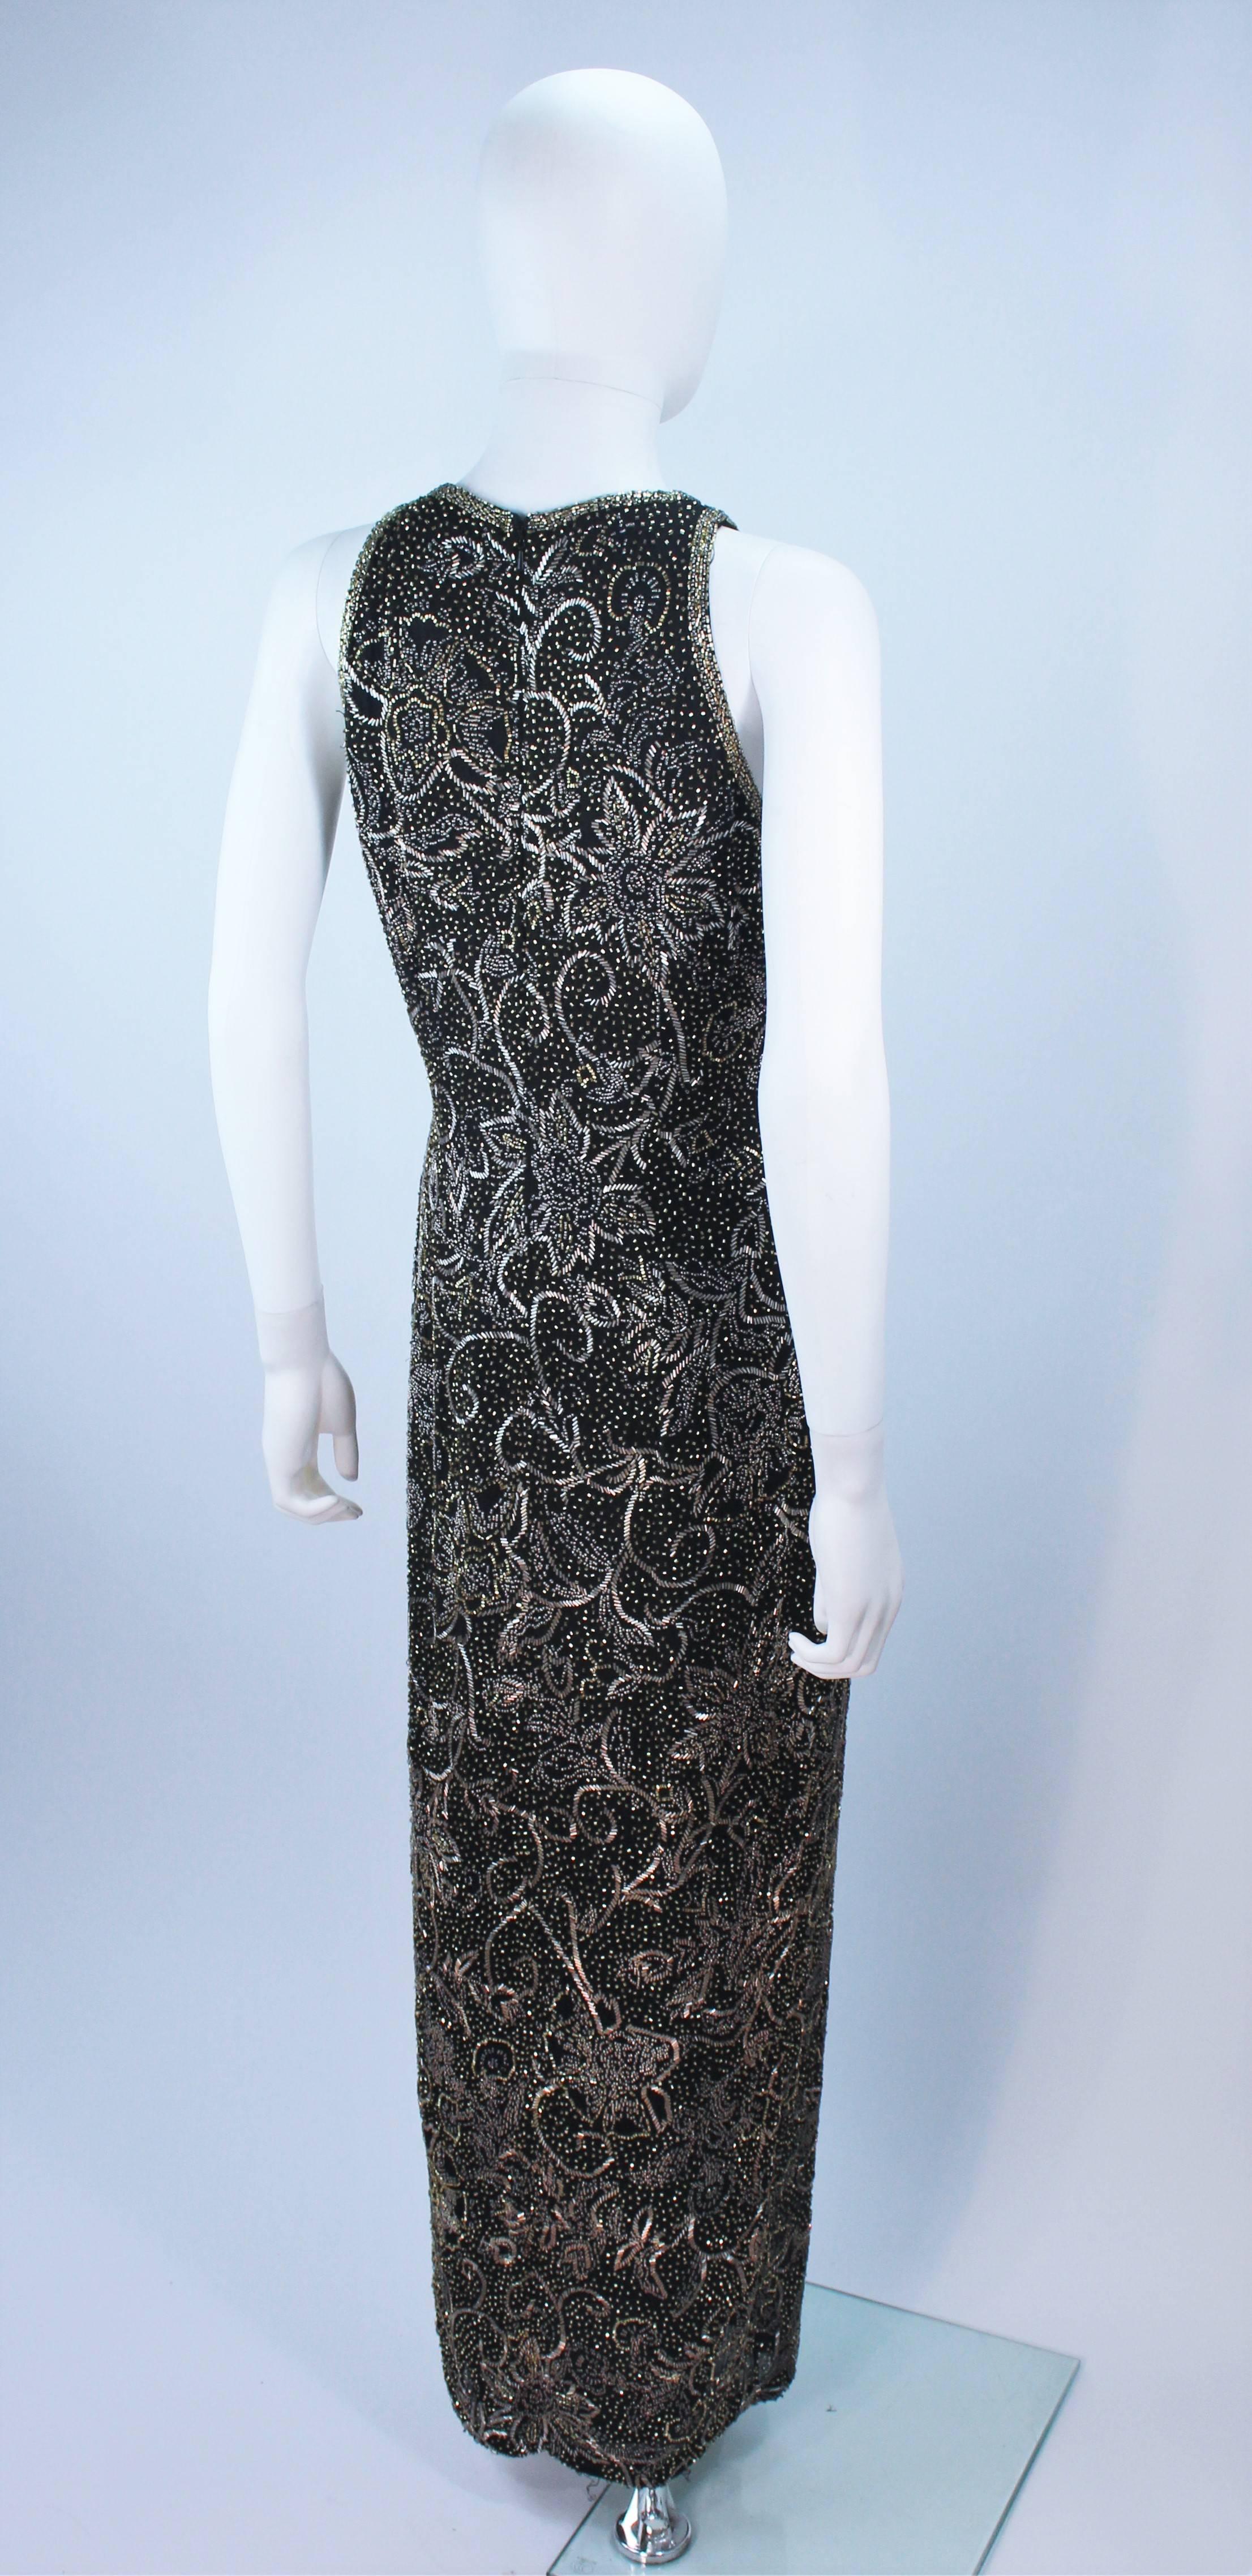 OLEG CASSINI Black and Gold Beaded Gown Size 8 For Sale 4